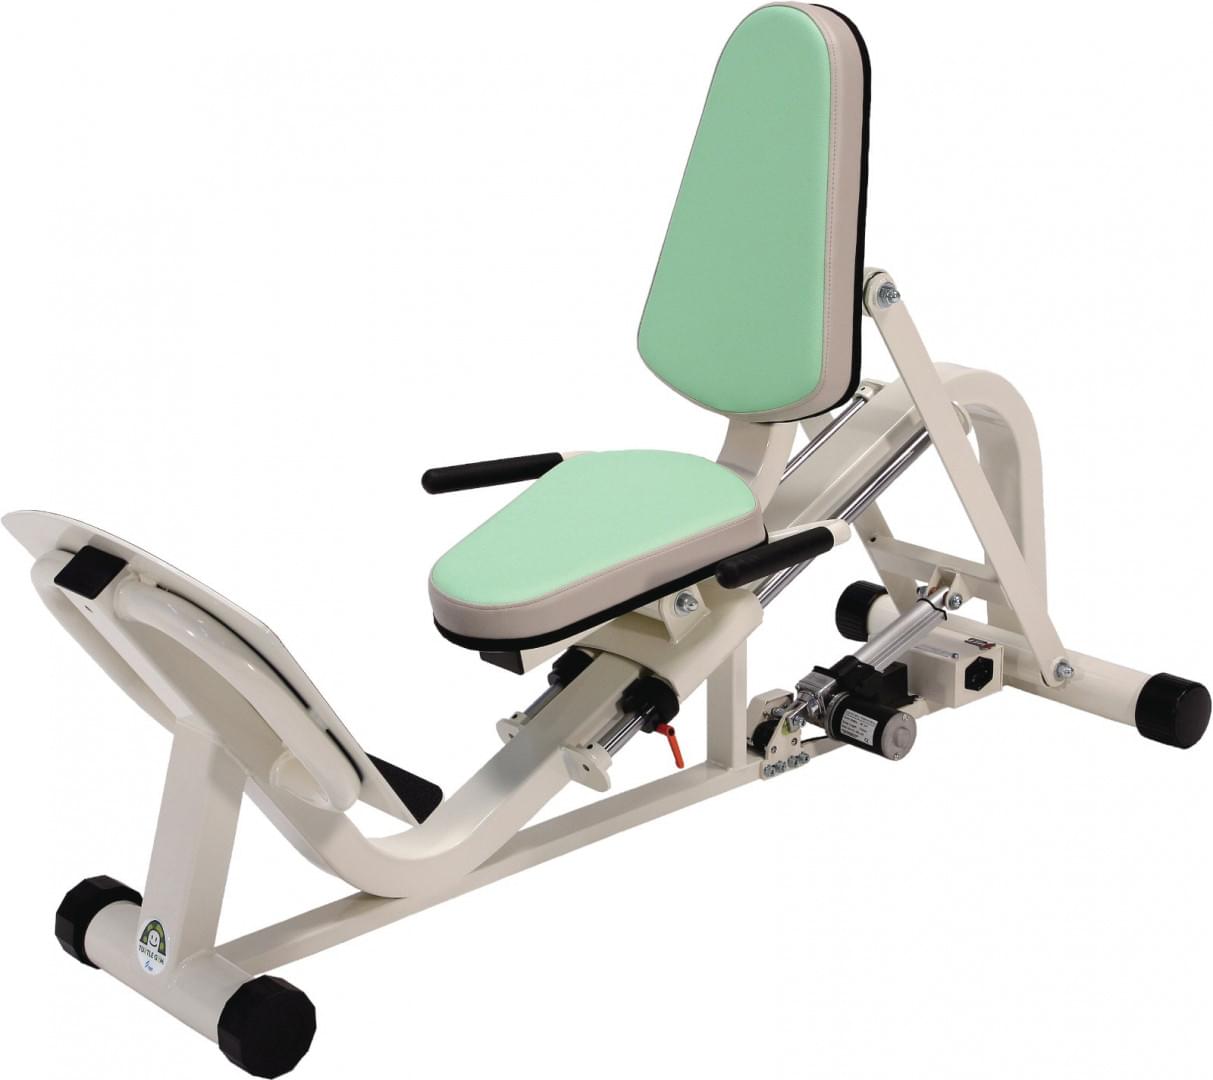 Turtle Gym Isokinetic Training Equipment - Leg Press from Delta Pyramax